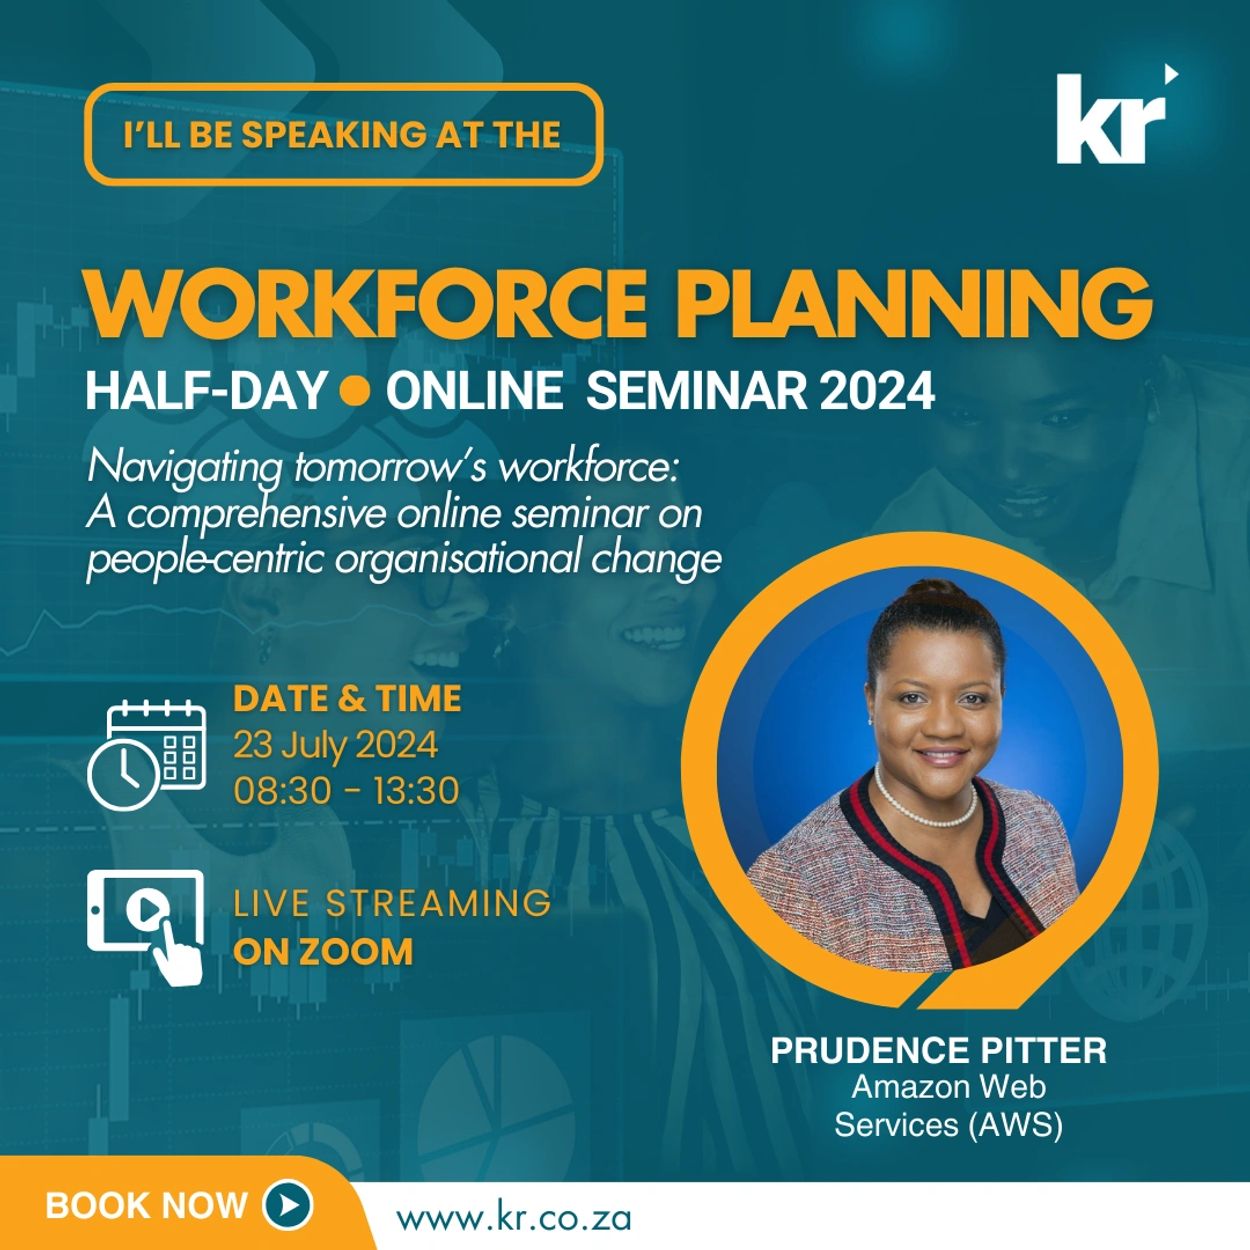 Workforce Planning Half-Day Online Seminar - How HR Leaders can add value through the succession pla